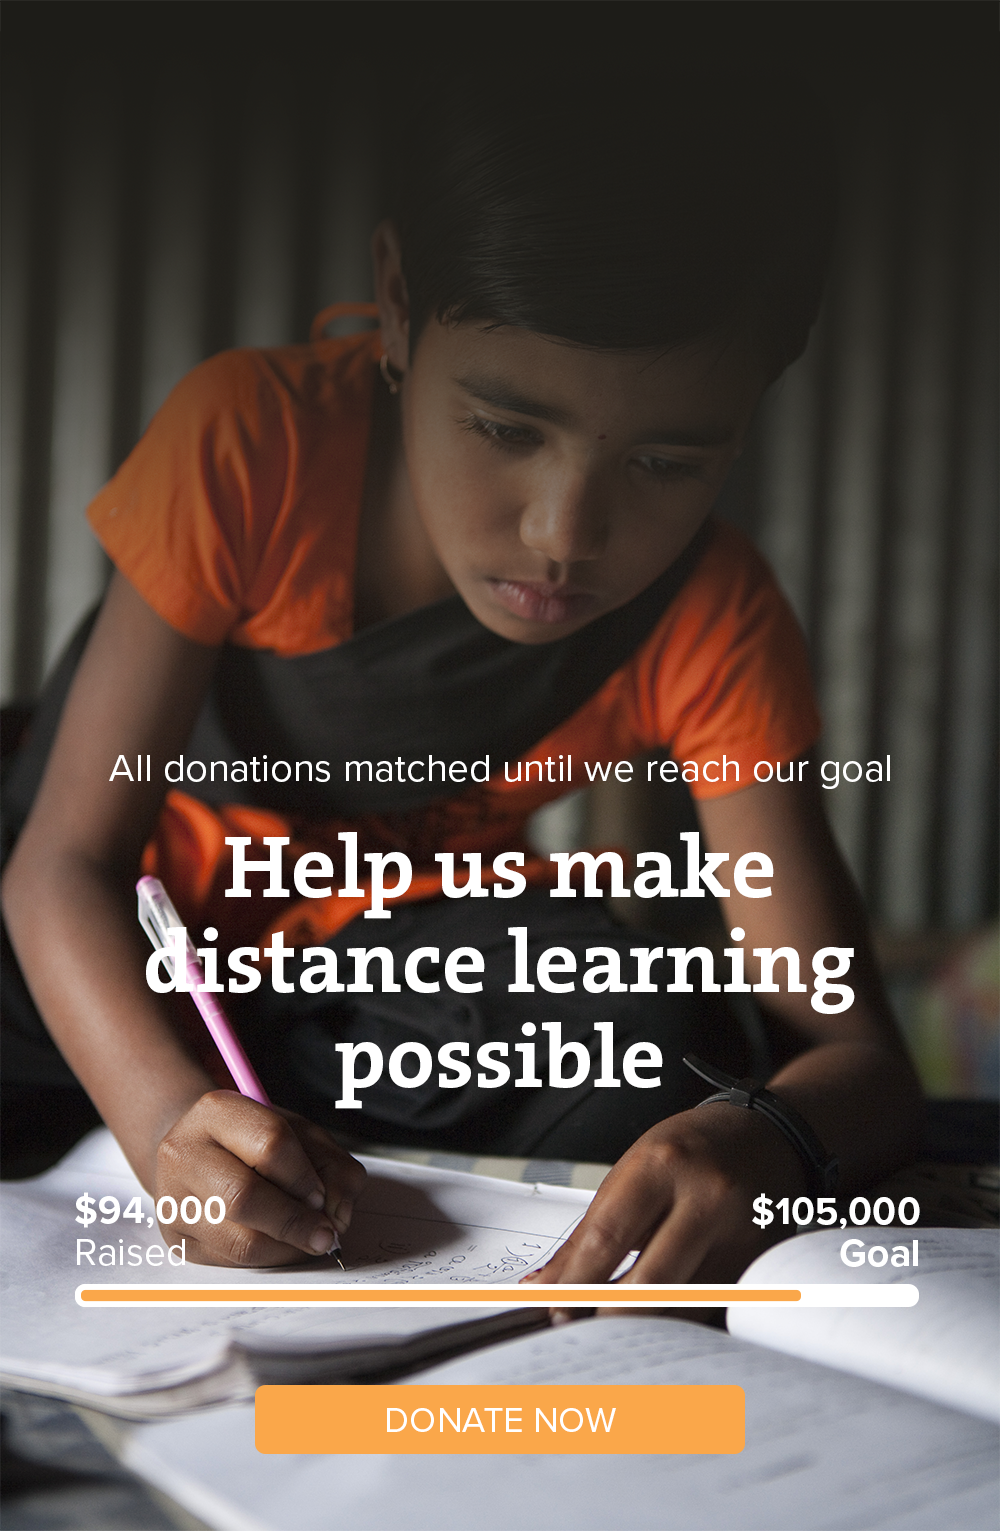 Help us make distance learning possible. All donations matched until we reach our goal!